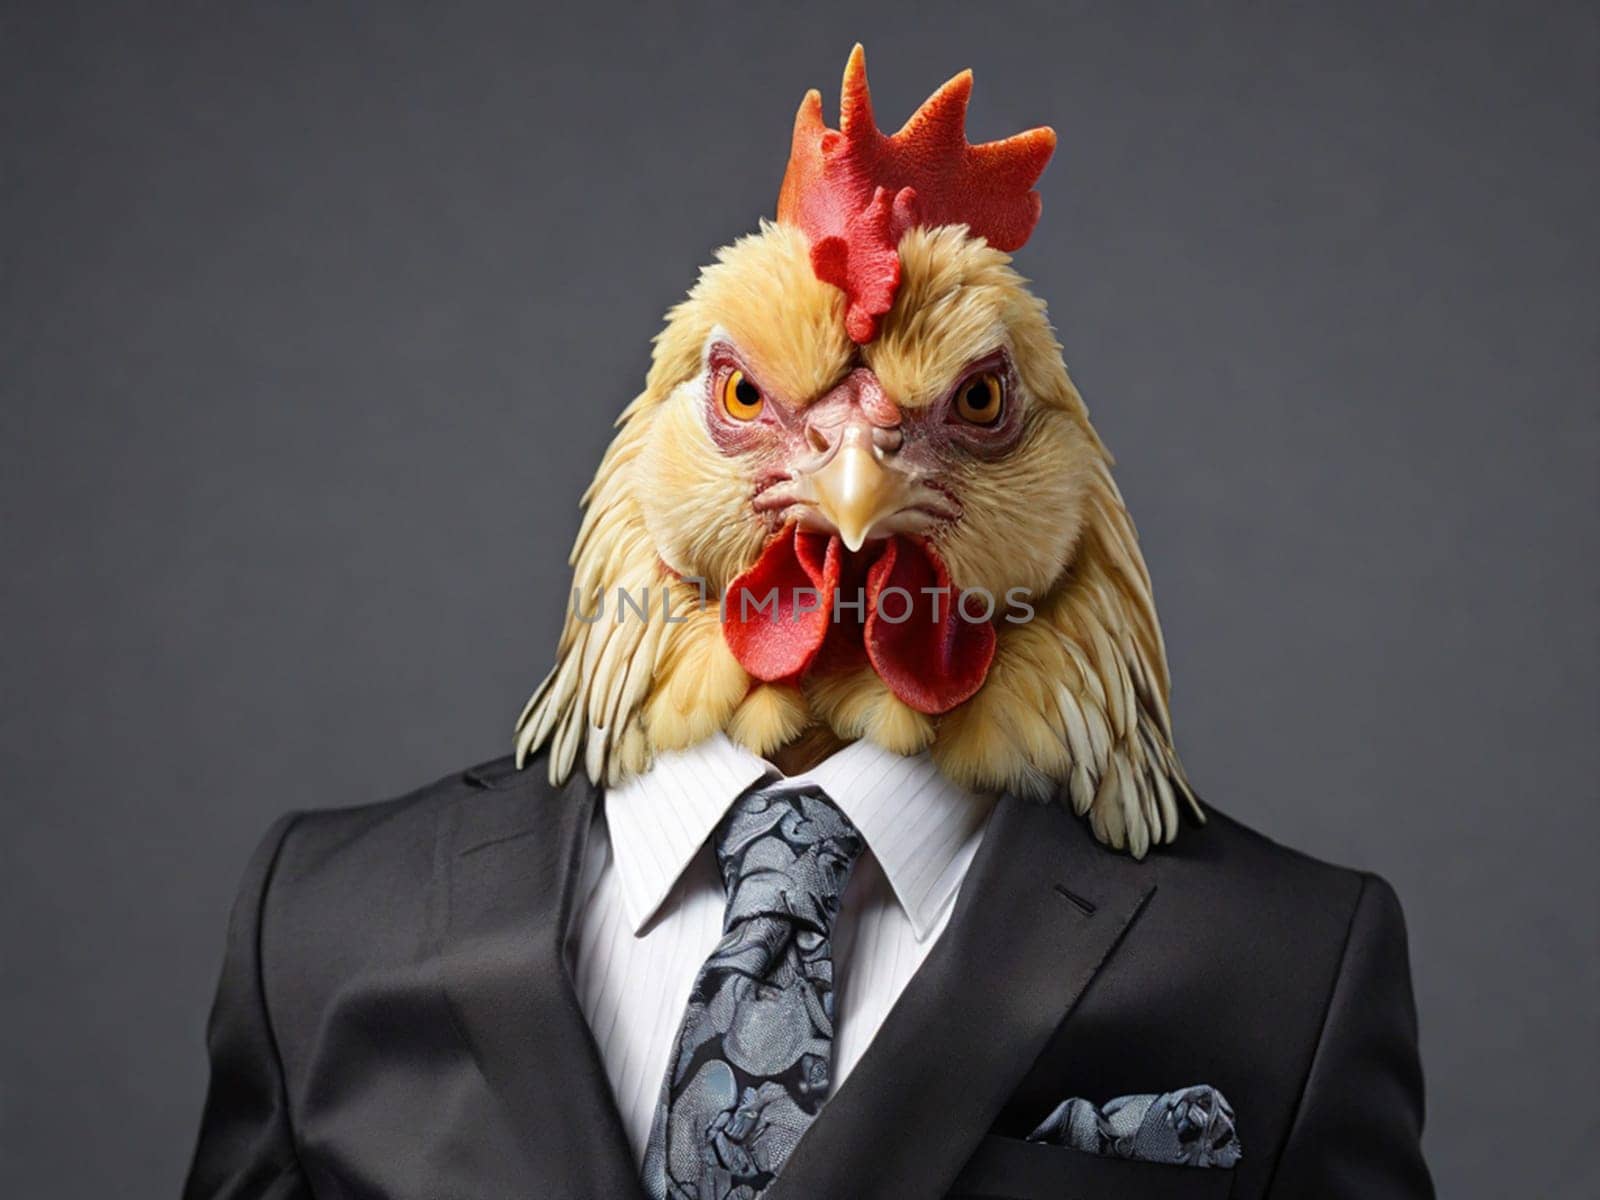 Business rooster boss in a business suit with a tie on a dark background by Ekaterina34